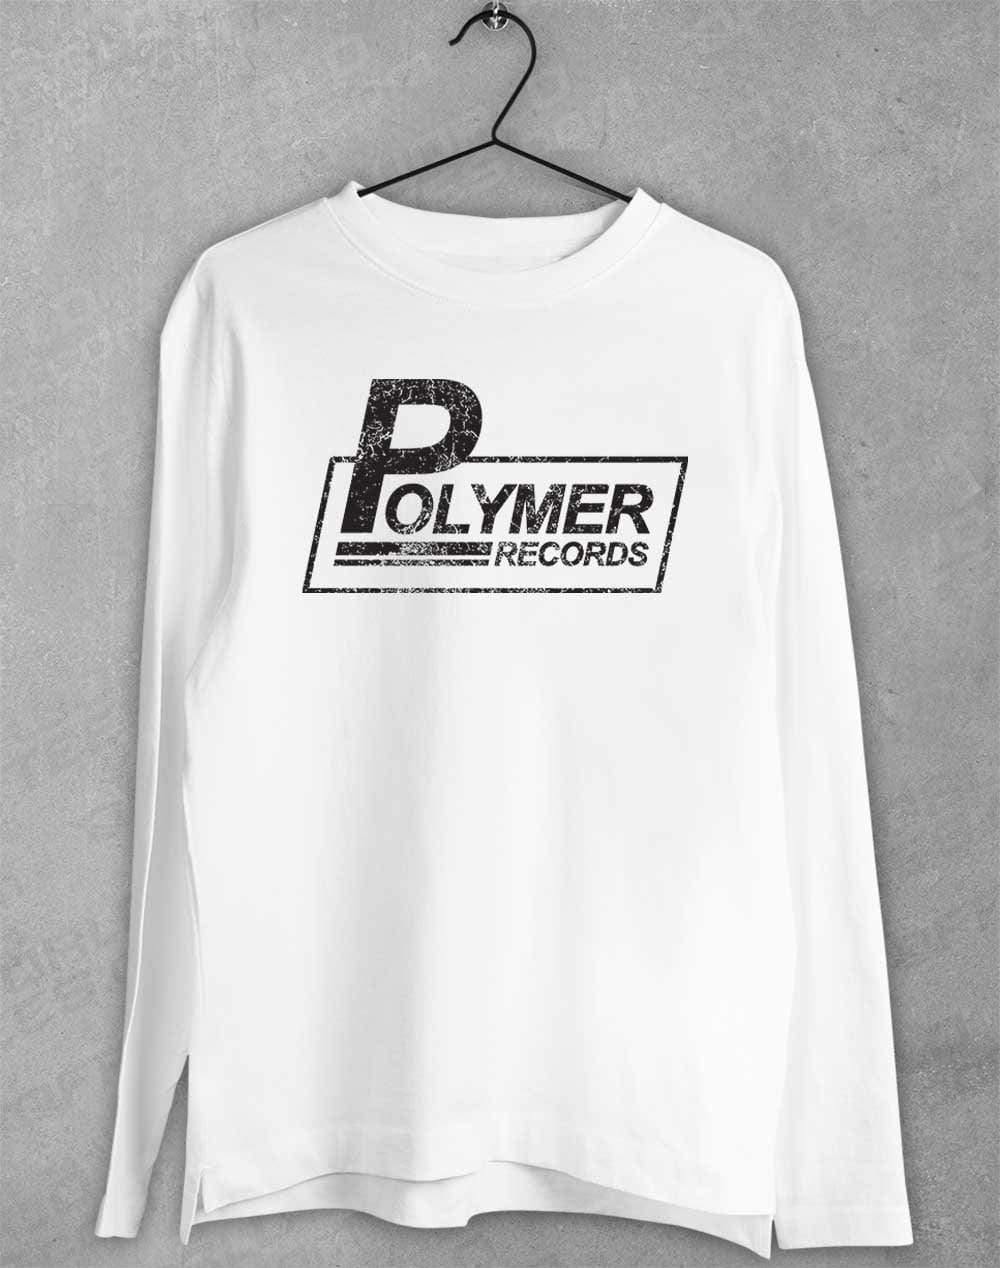 Polymer Records Distressed Logo Long Sleeve T-Shirt S / White  - Off World Tees